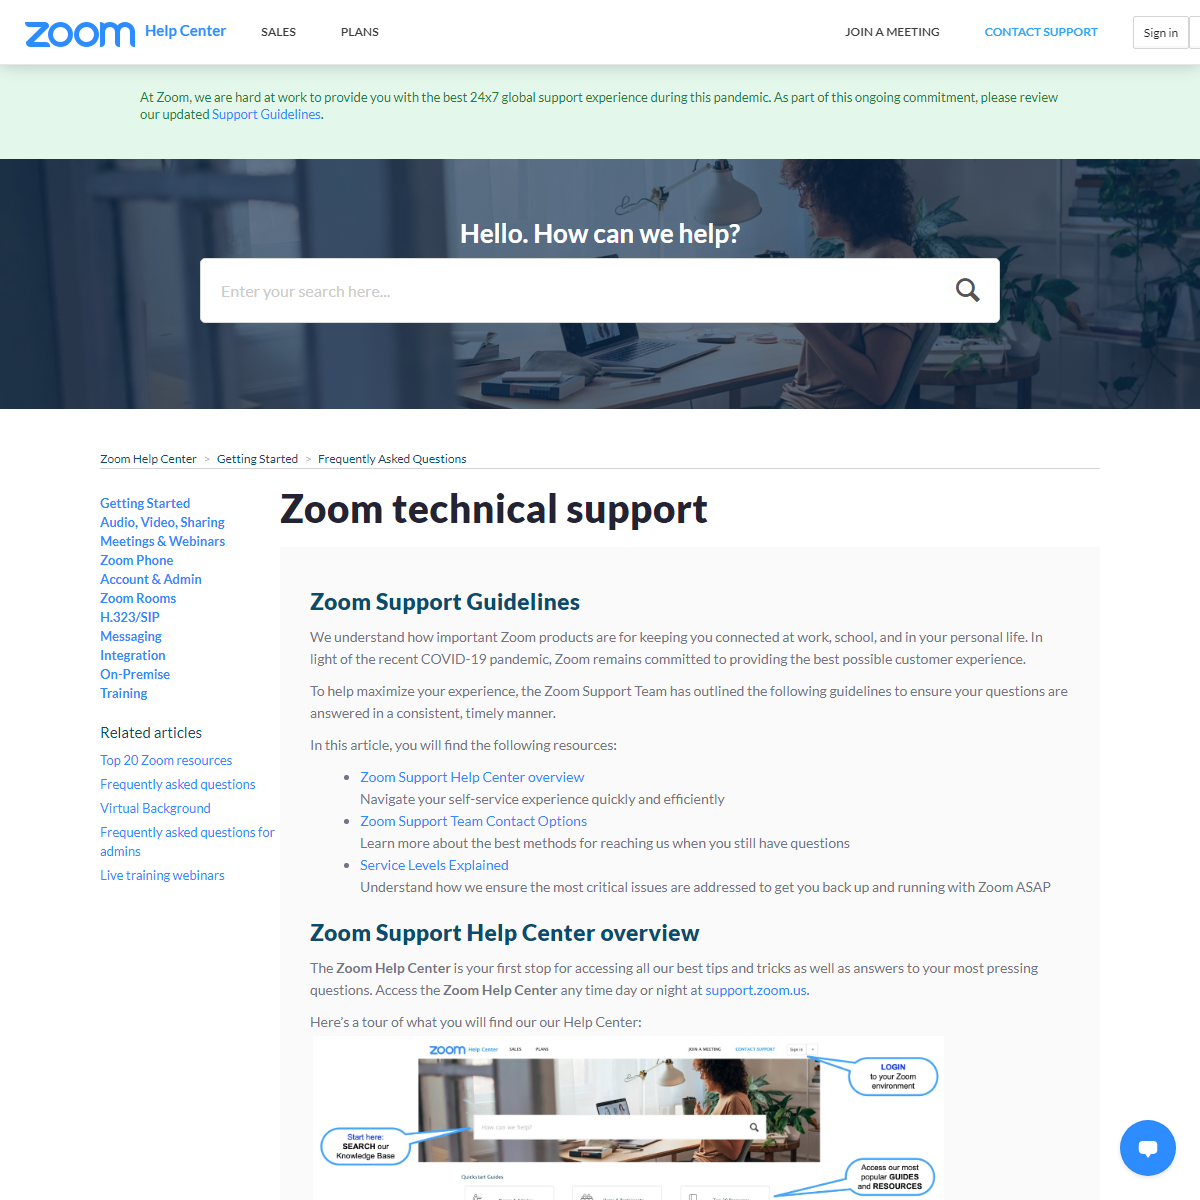 A complete backup of https://support.zoom.us/hc/en-us/articles/201362003-Zoom-Technical-Support